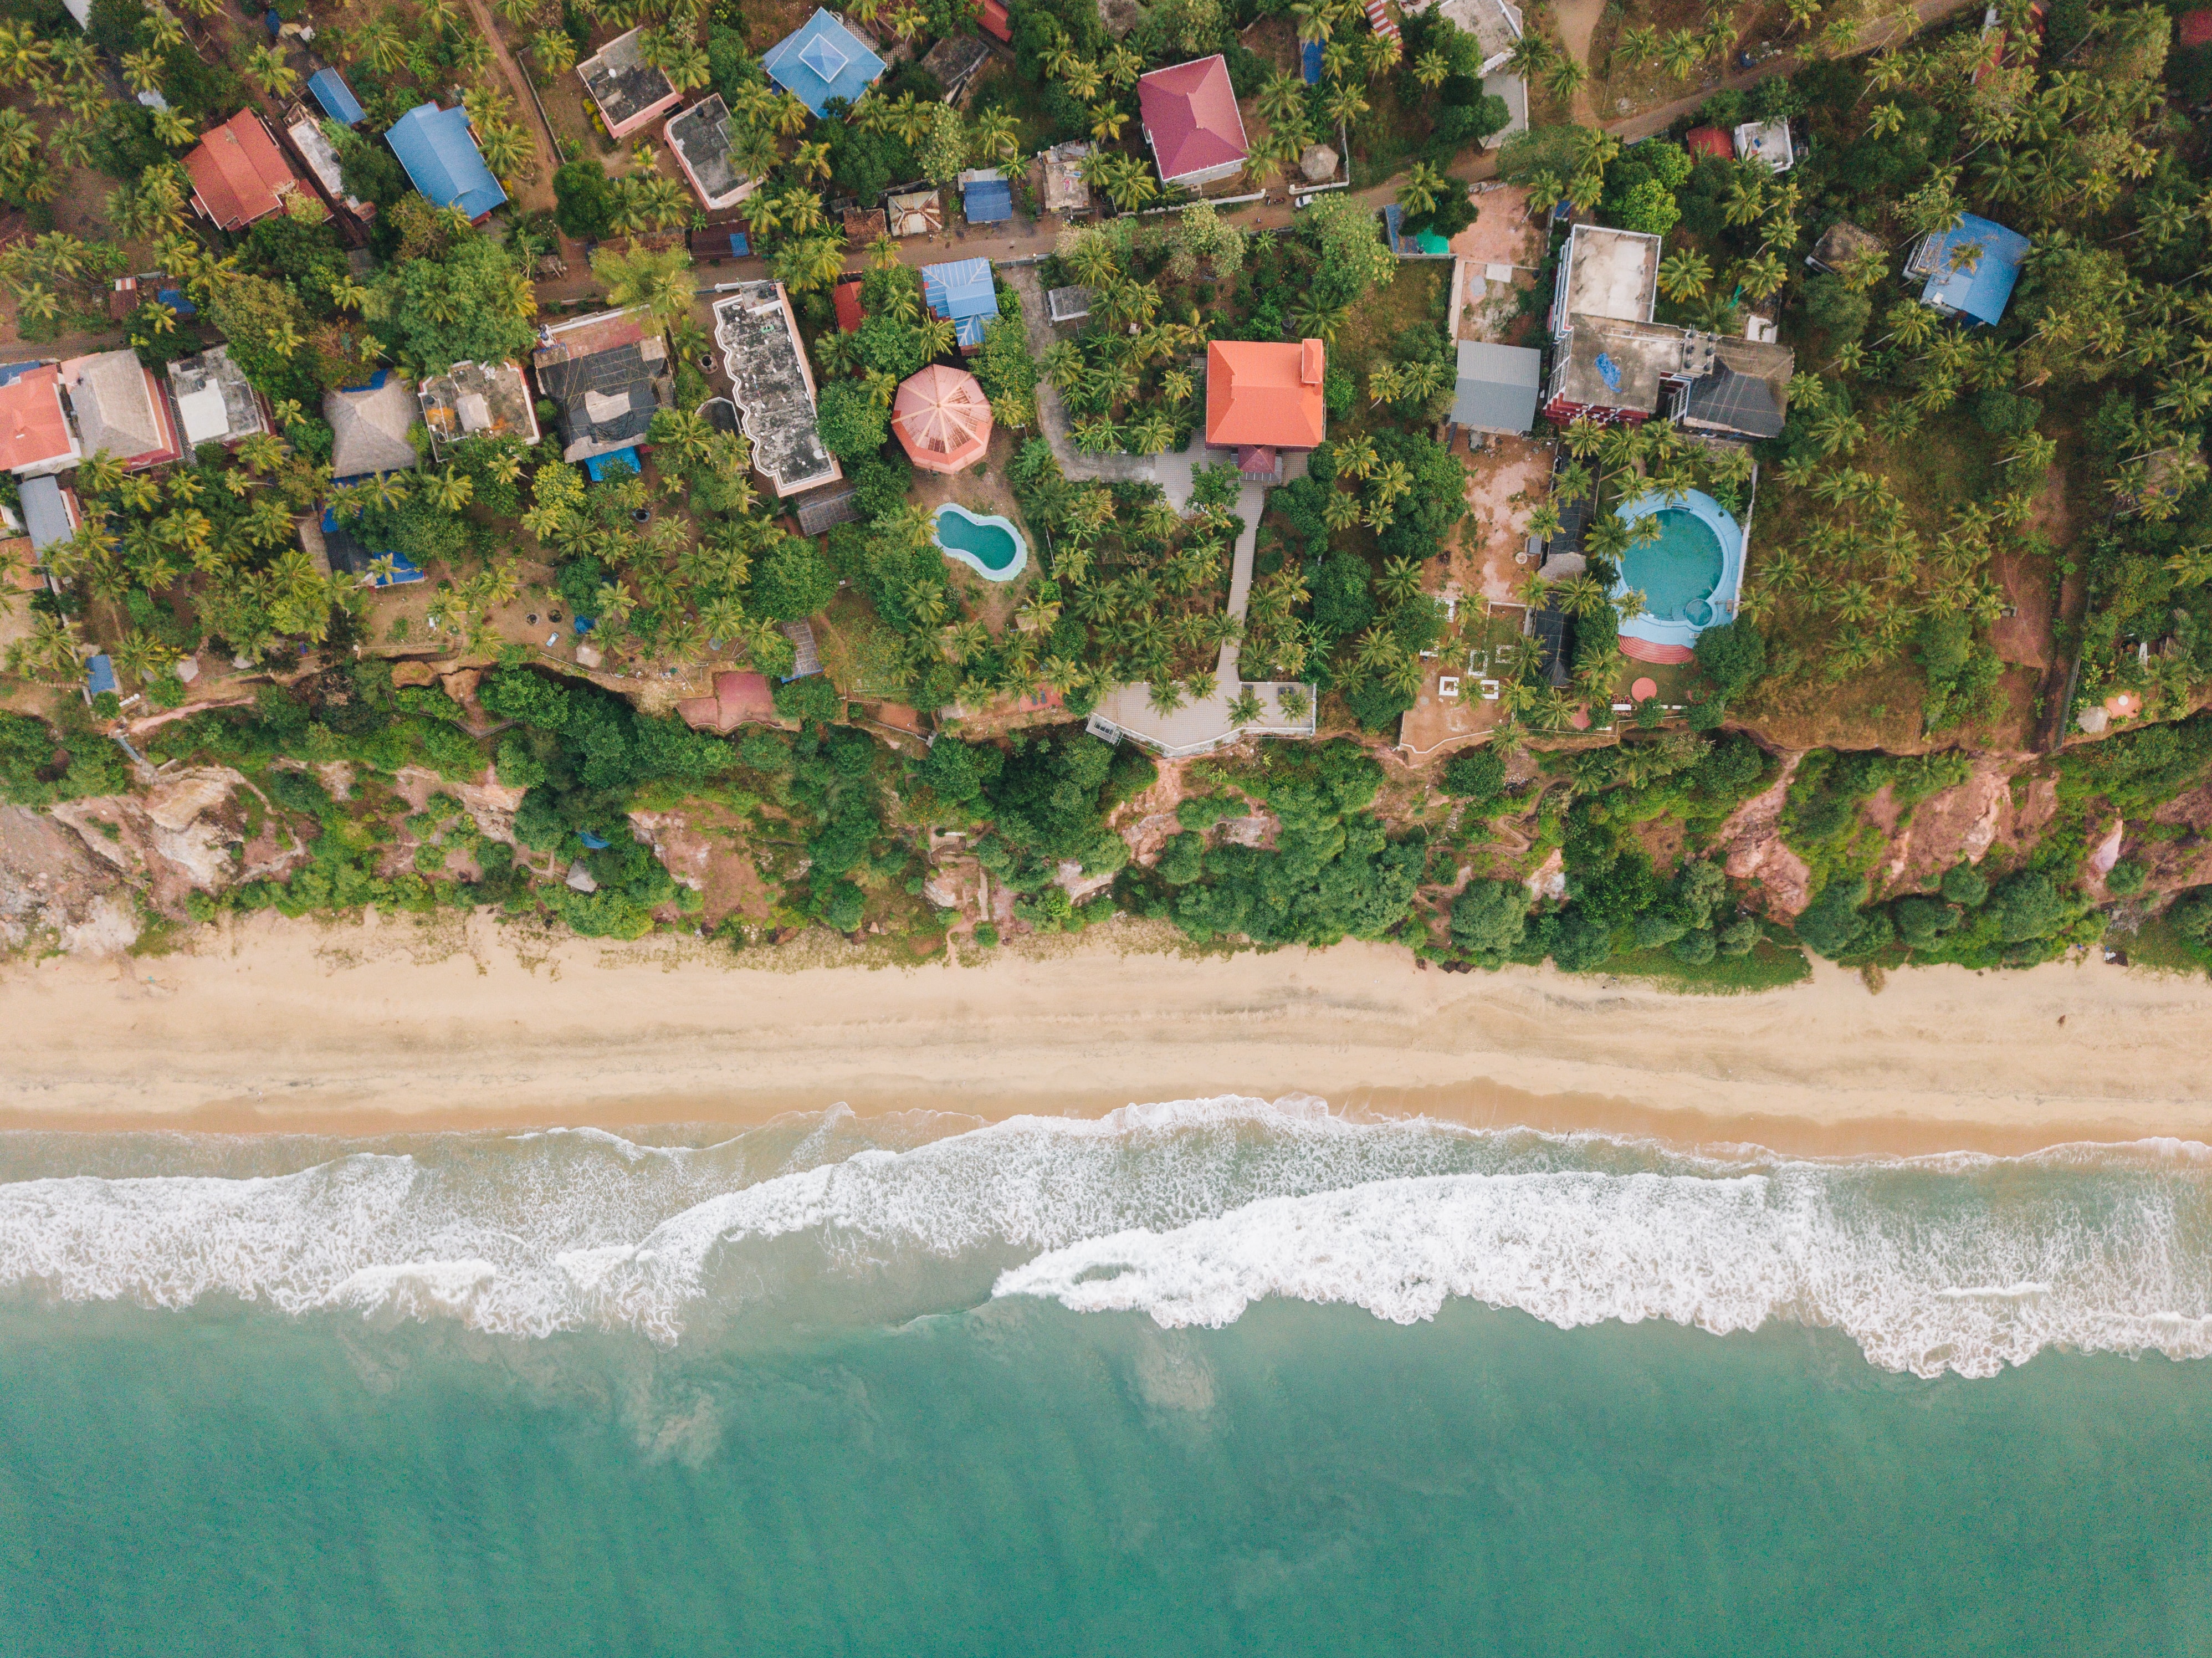 shore, view from above, nature, beach, palms, building, bank cellphone